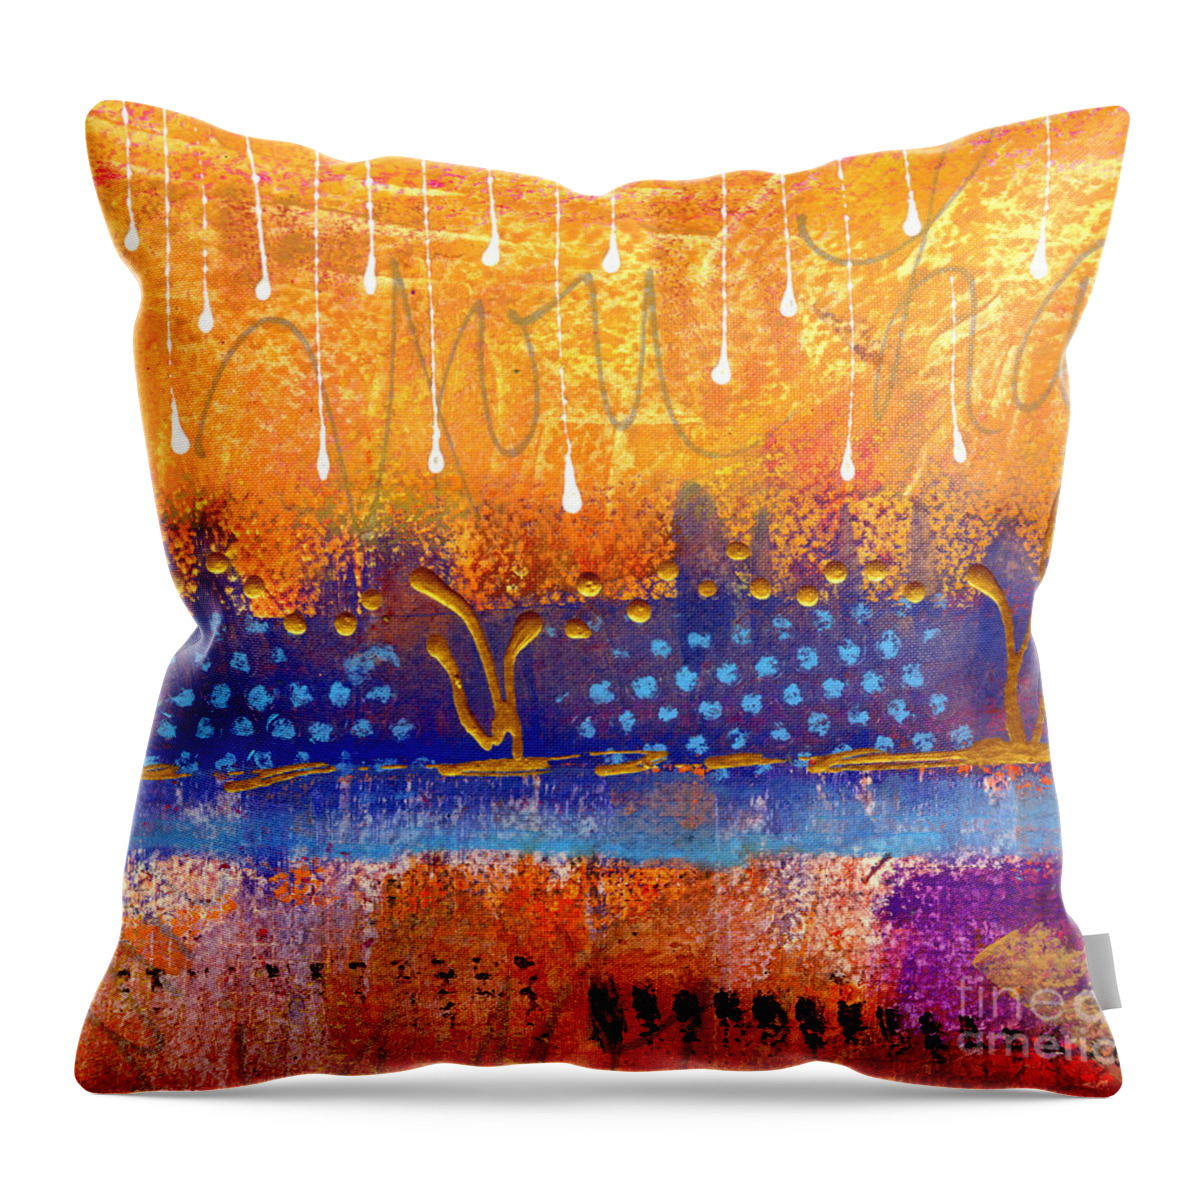 Riverfront Throw Pillow featuring the painting Riverfront View by Angela L Walker